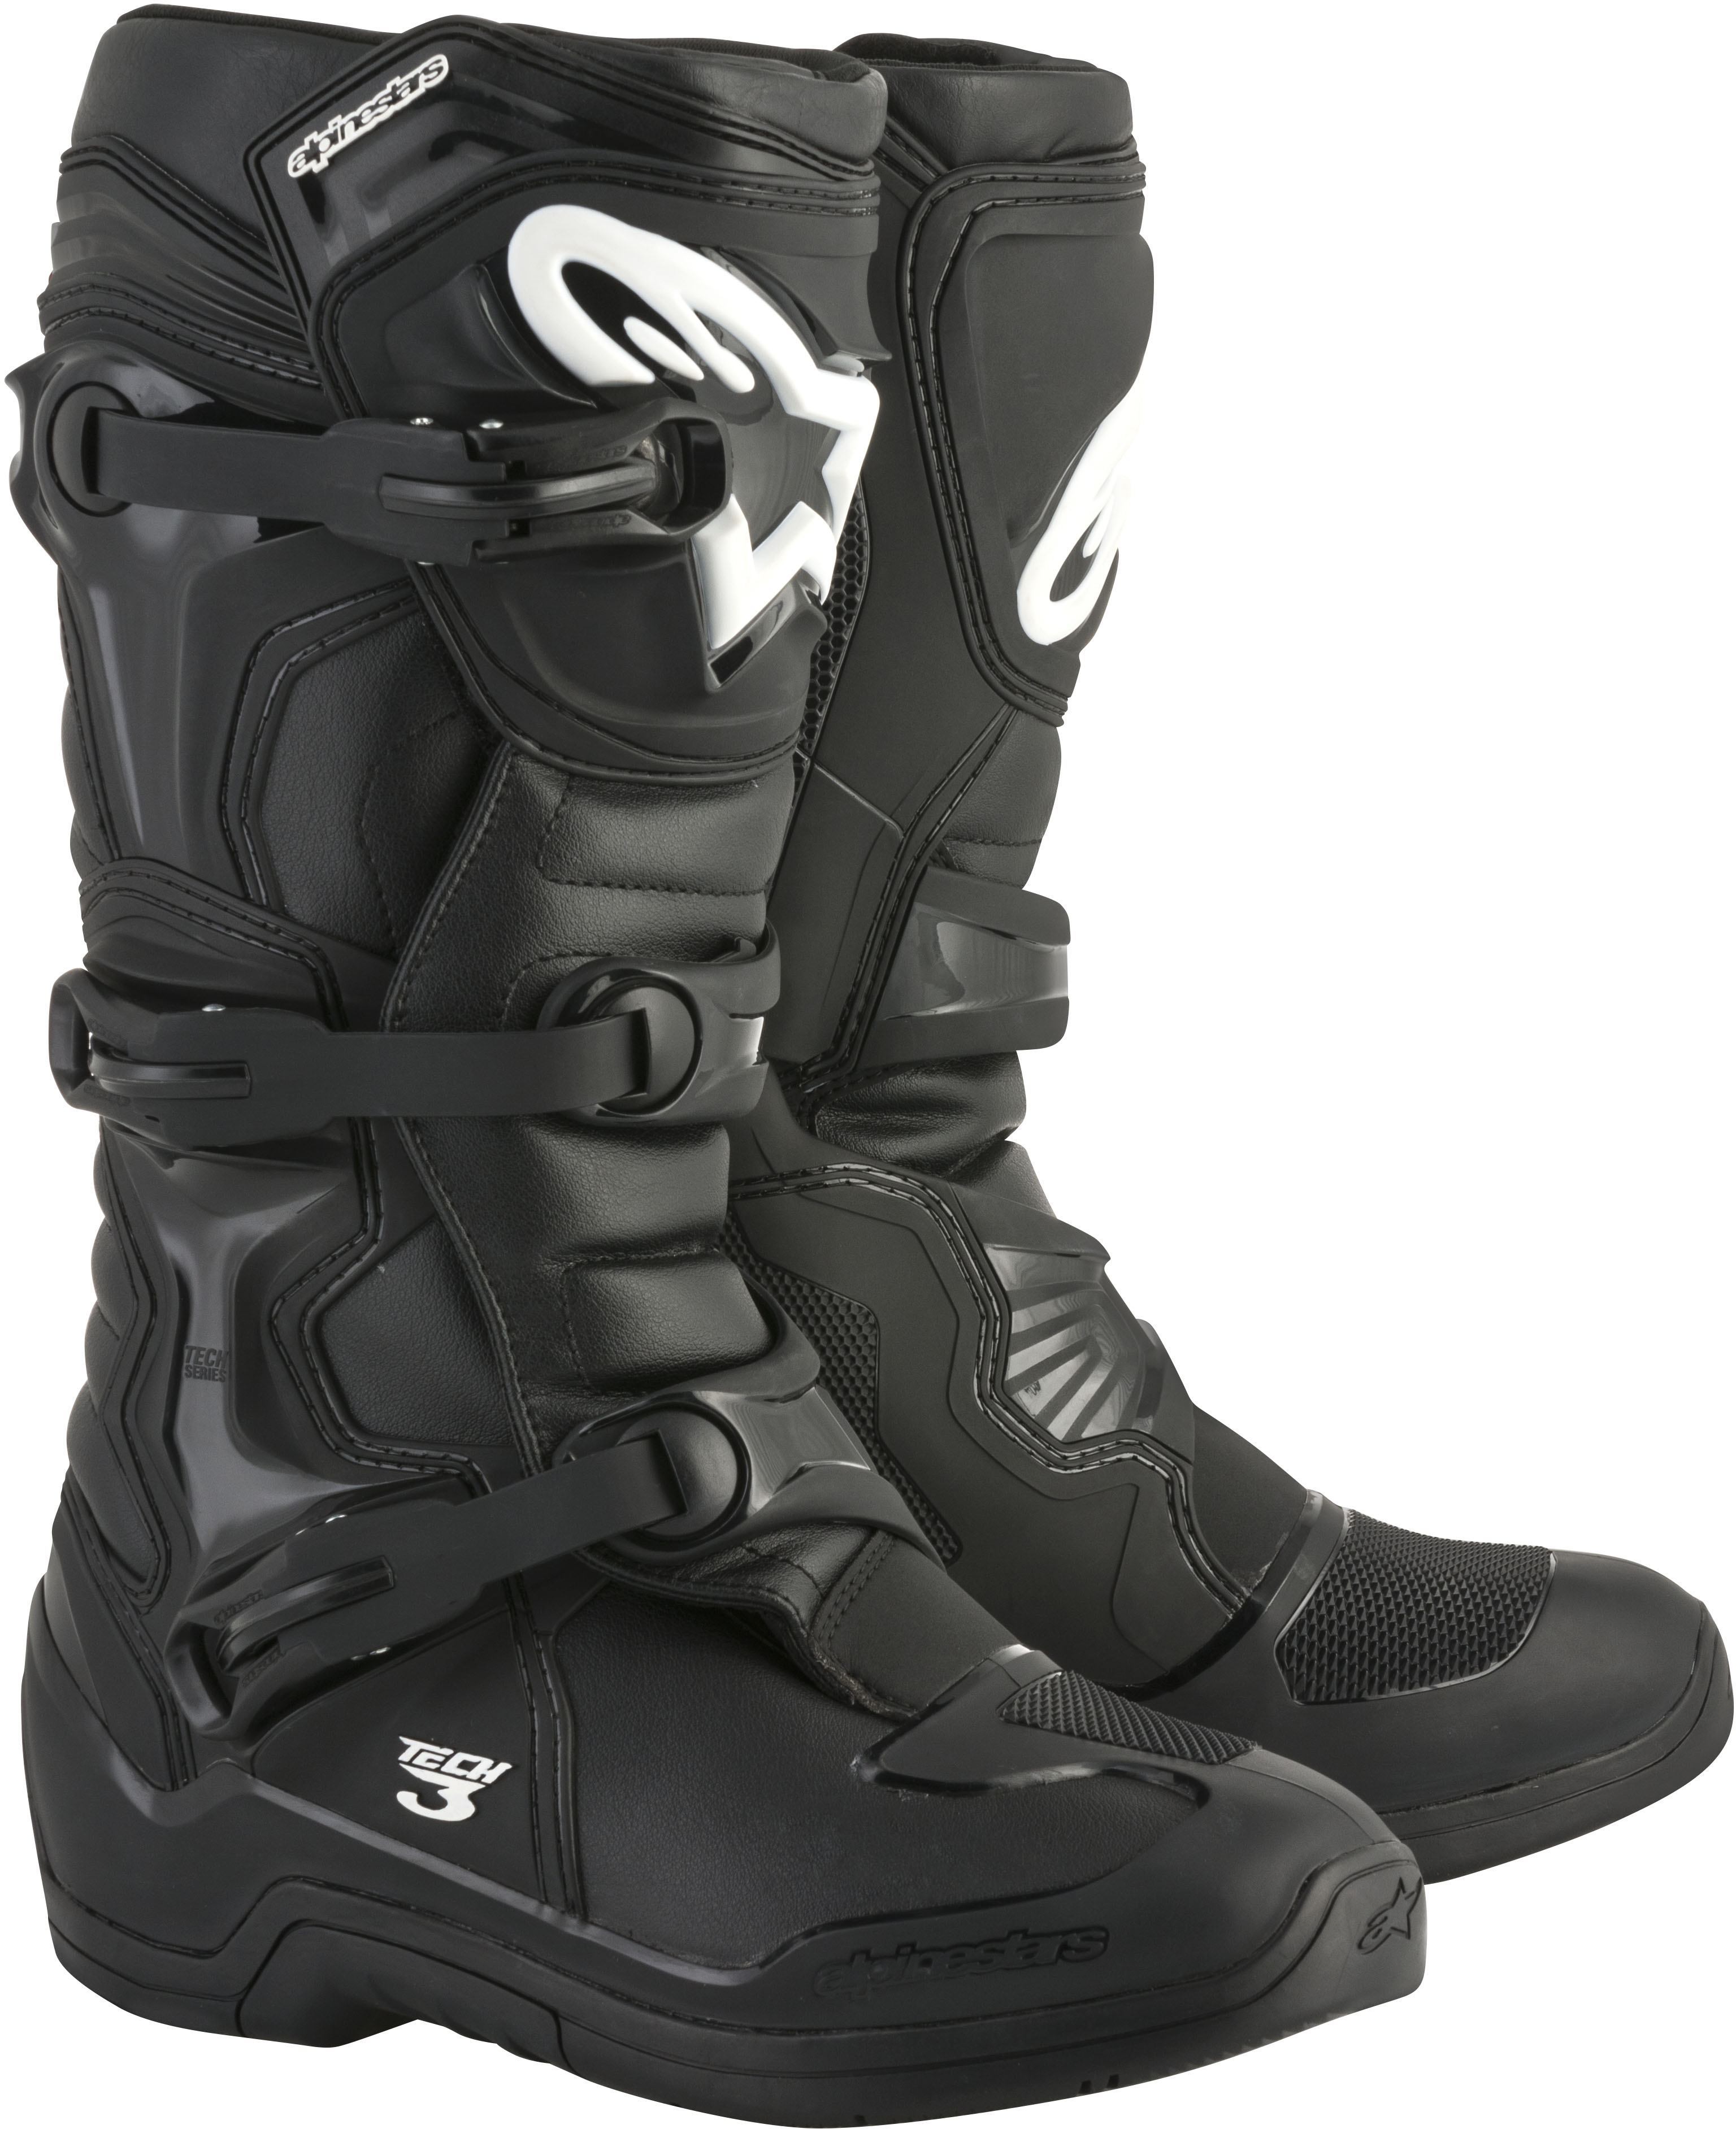 Tech 3 Boots Black Size 7 - Click Image to Close